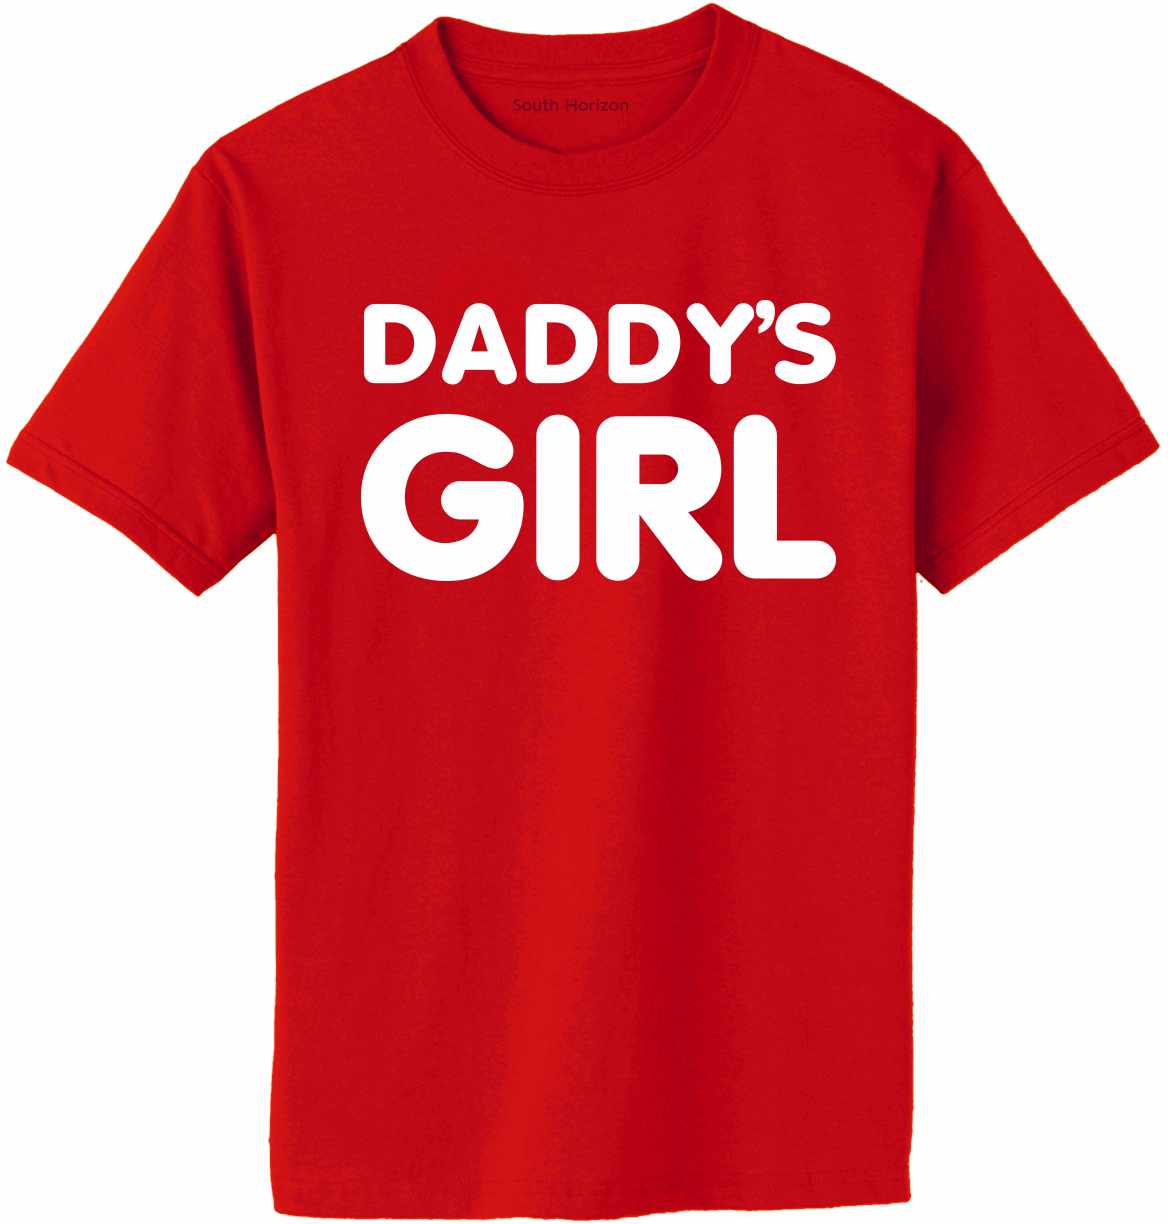 Daddy's Girl on Adult T-Shirt (#1218-1)